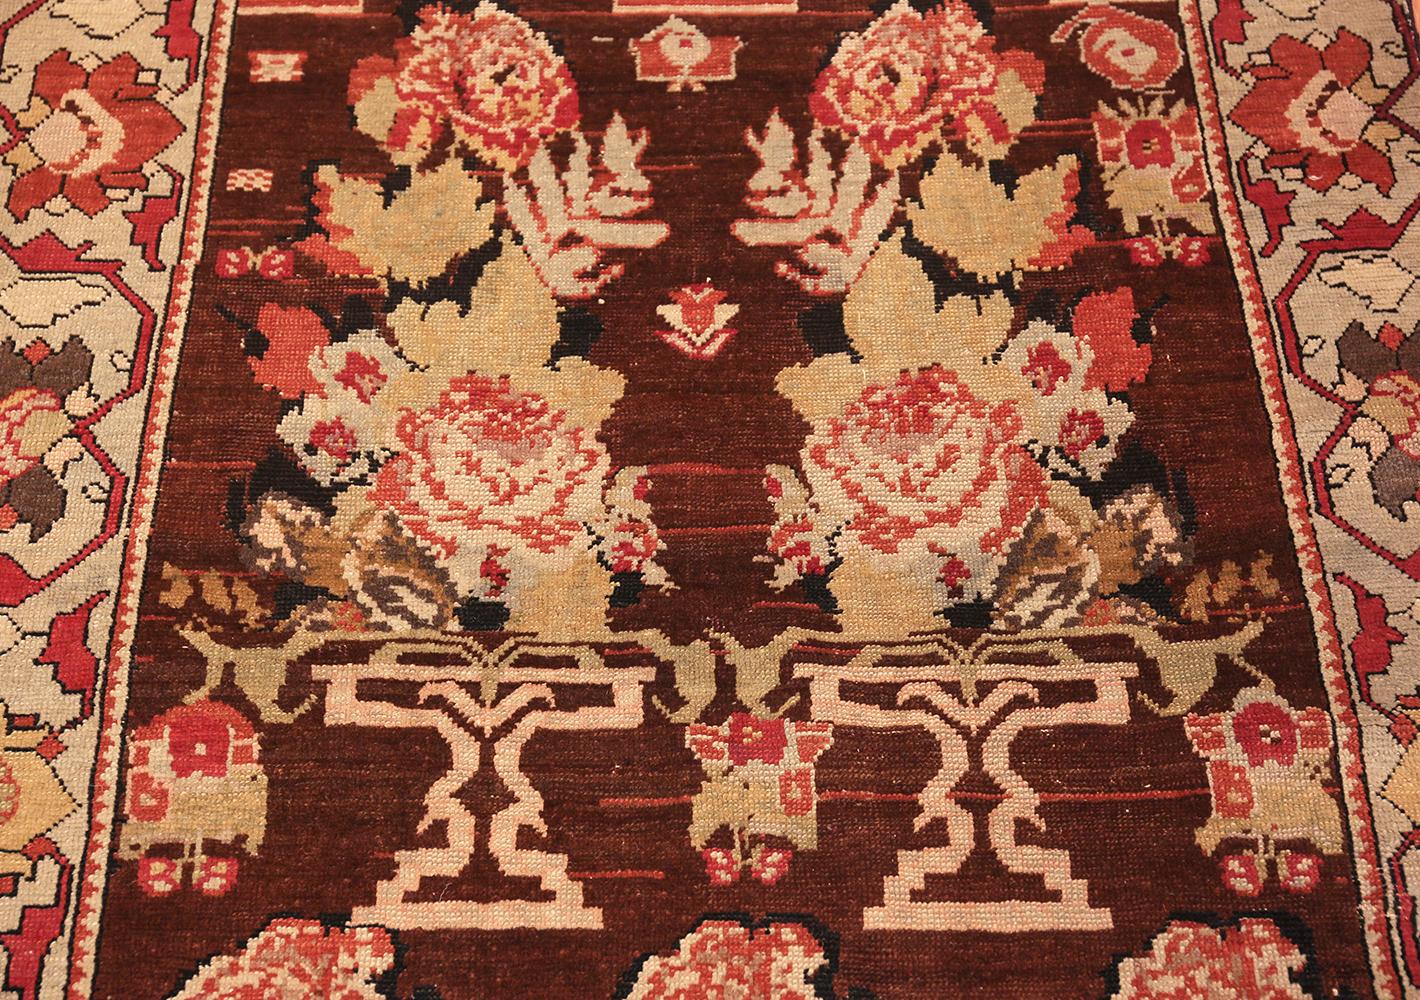 Antique Caucasian Karabagh runner rug, Origin: Caucasus, date circa 1900. Size: 3 ft 6 in x 13 ft 8 in (1.07 m x 4.17 m). Karabagh is situated in the southern portion of the Caucasus mountains near the border of what is now present-day Armenia and